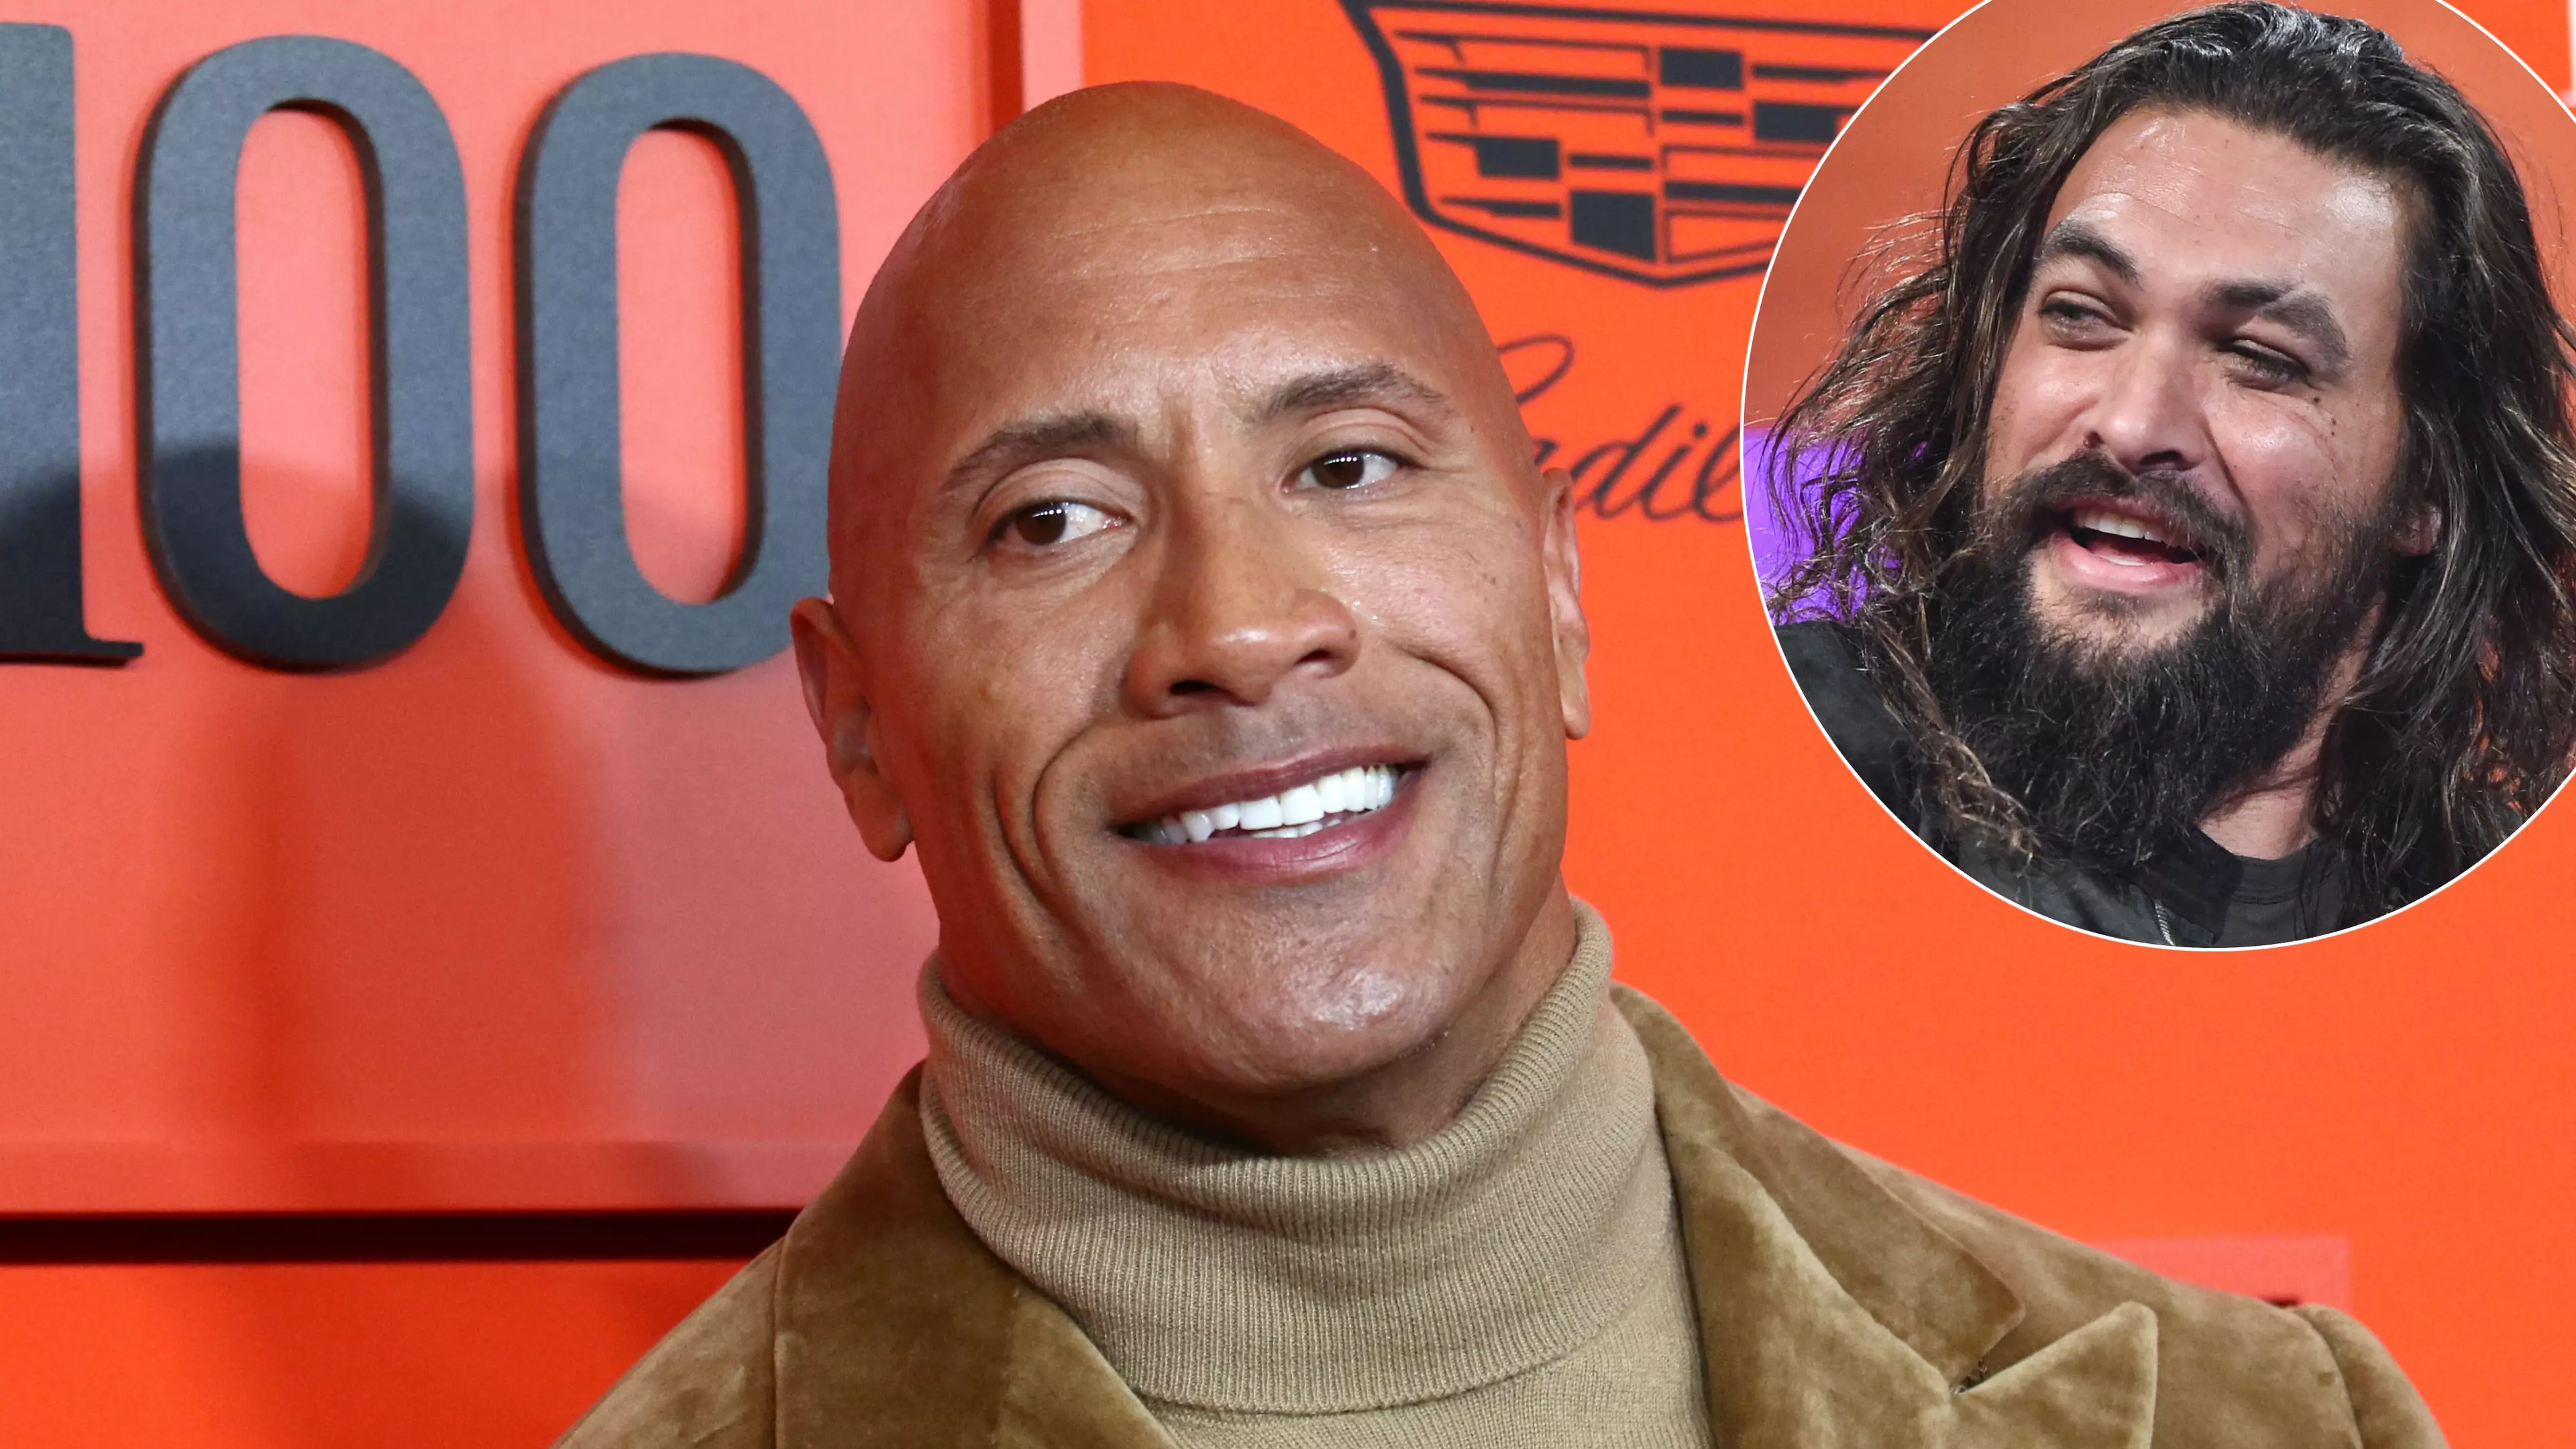 The Rock Wanted Jason Momoa To Play His Brother In 'Hobbs And Shaw'